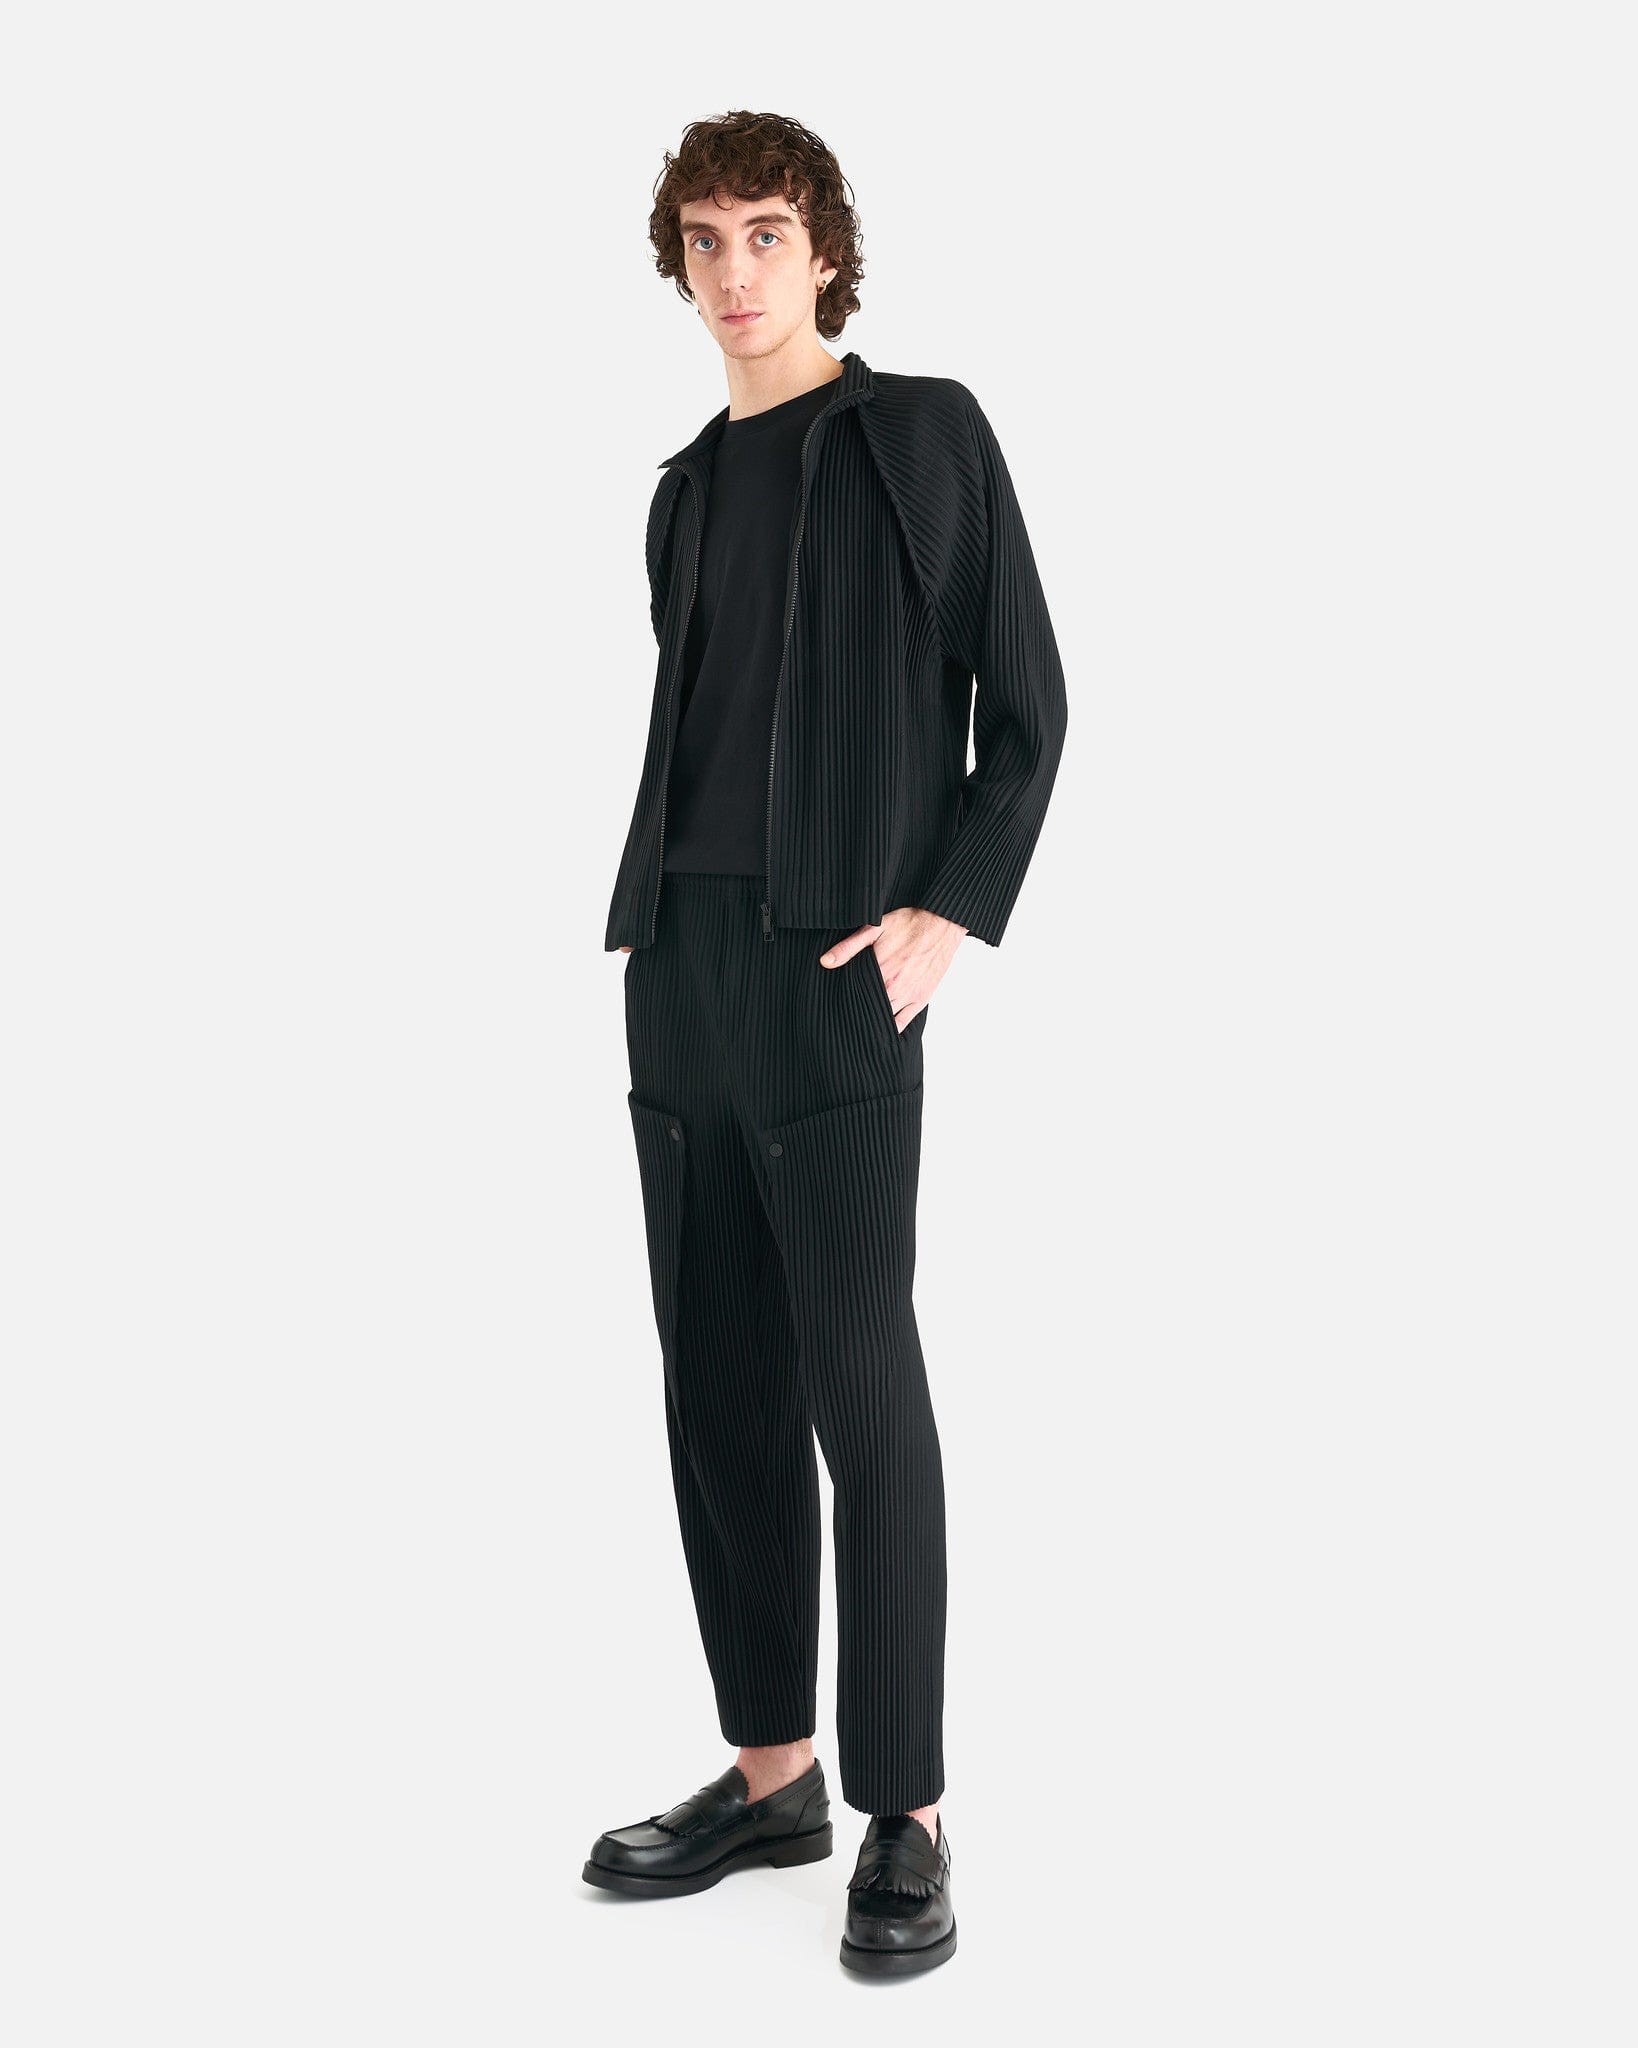 Homme Plissé Issey Miyake – Page 2 – SVRN